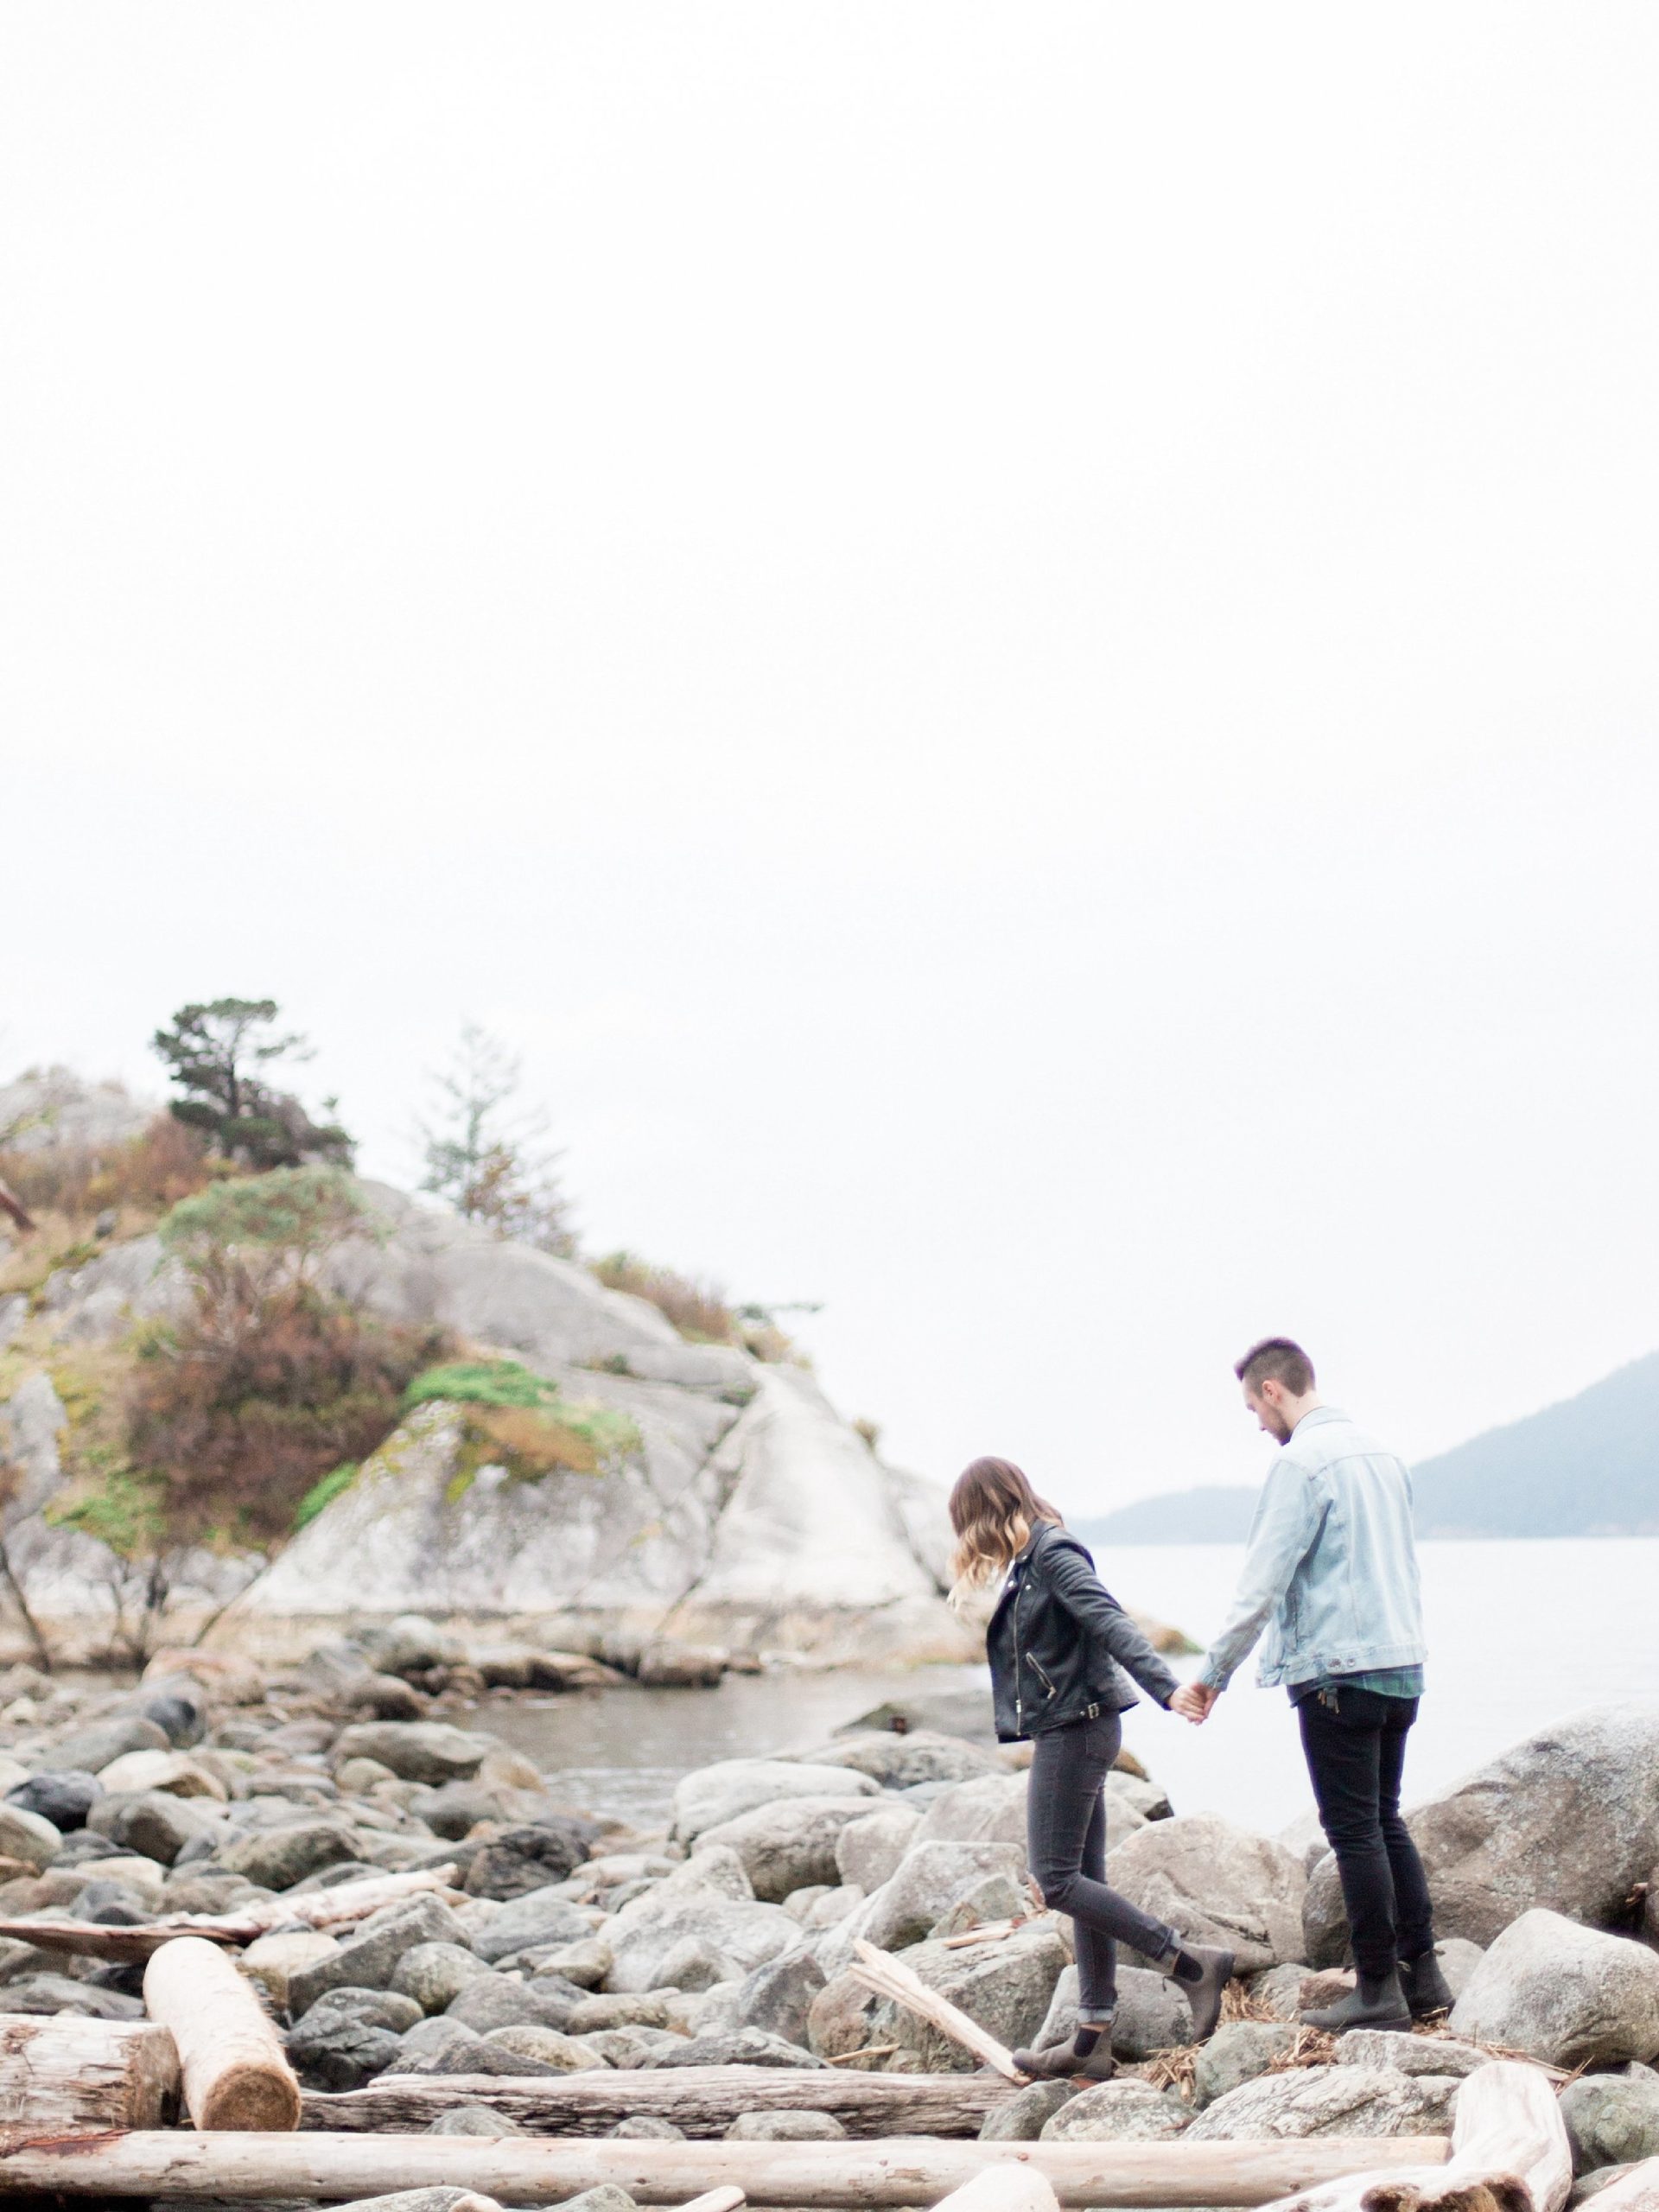 Whytecliff Park Engagement Session, Vancouver Engagement Session, Couples Session Idea, Engagement Session Ideas, Keila Marie Photography